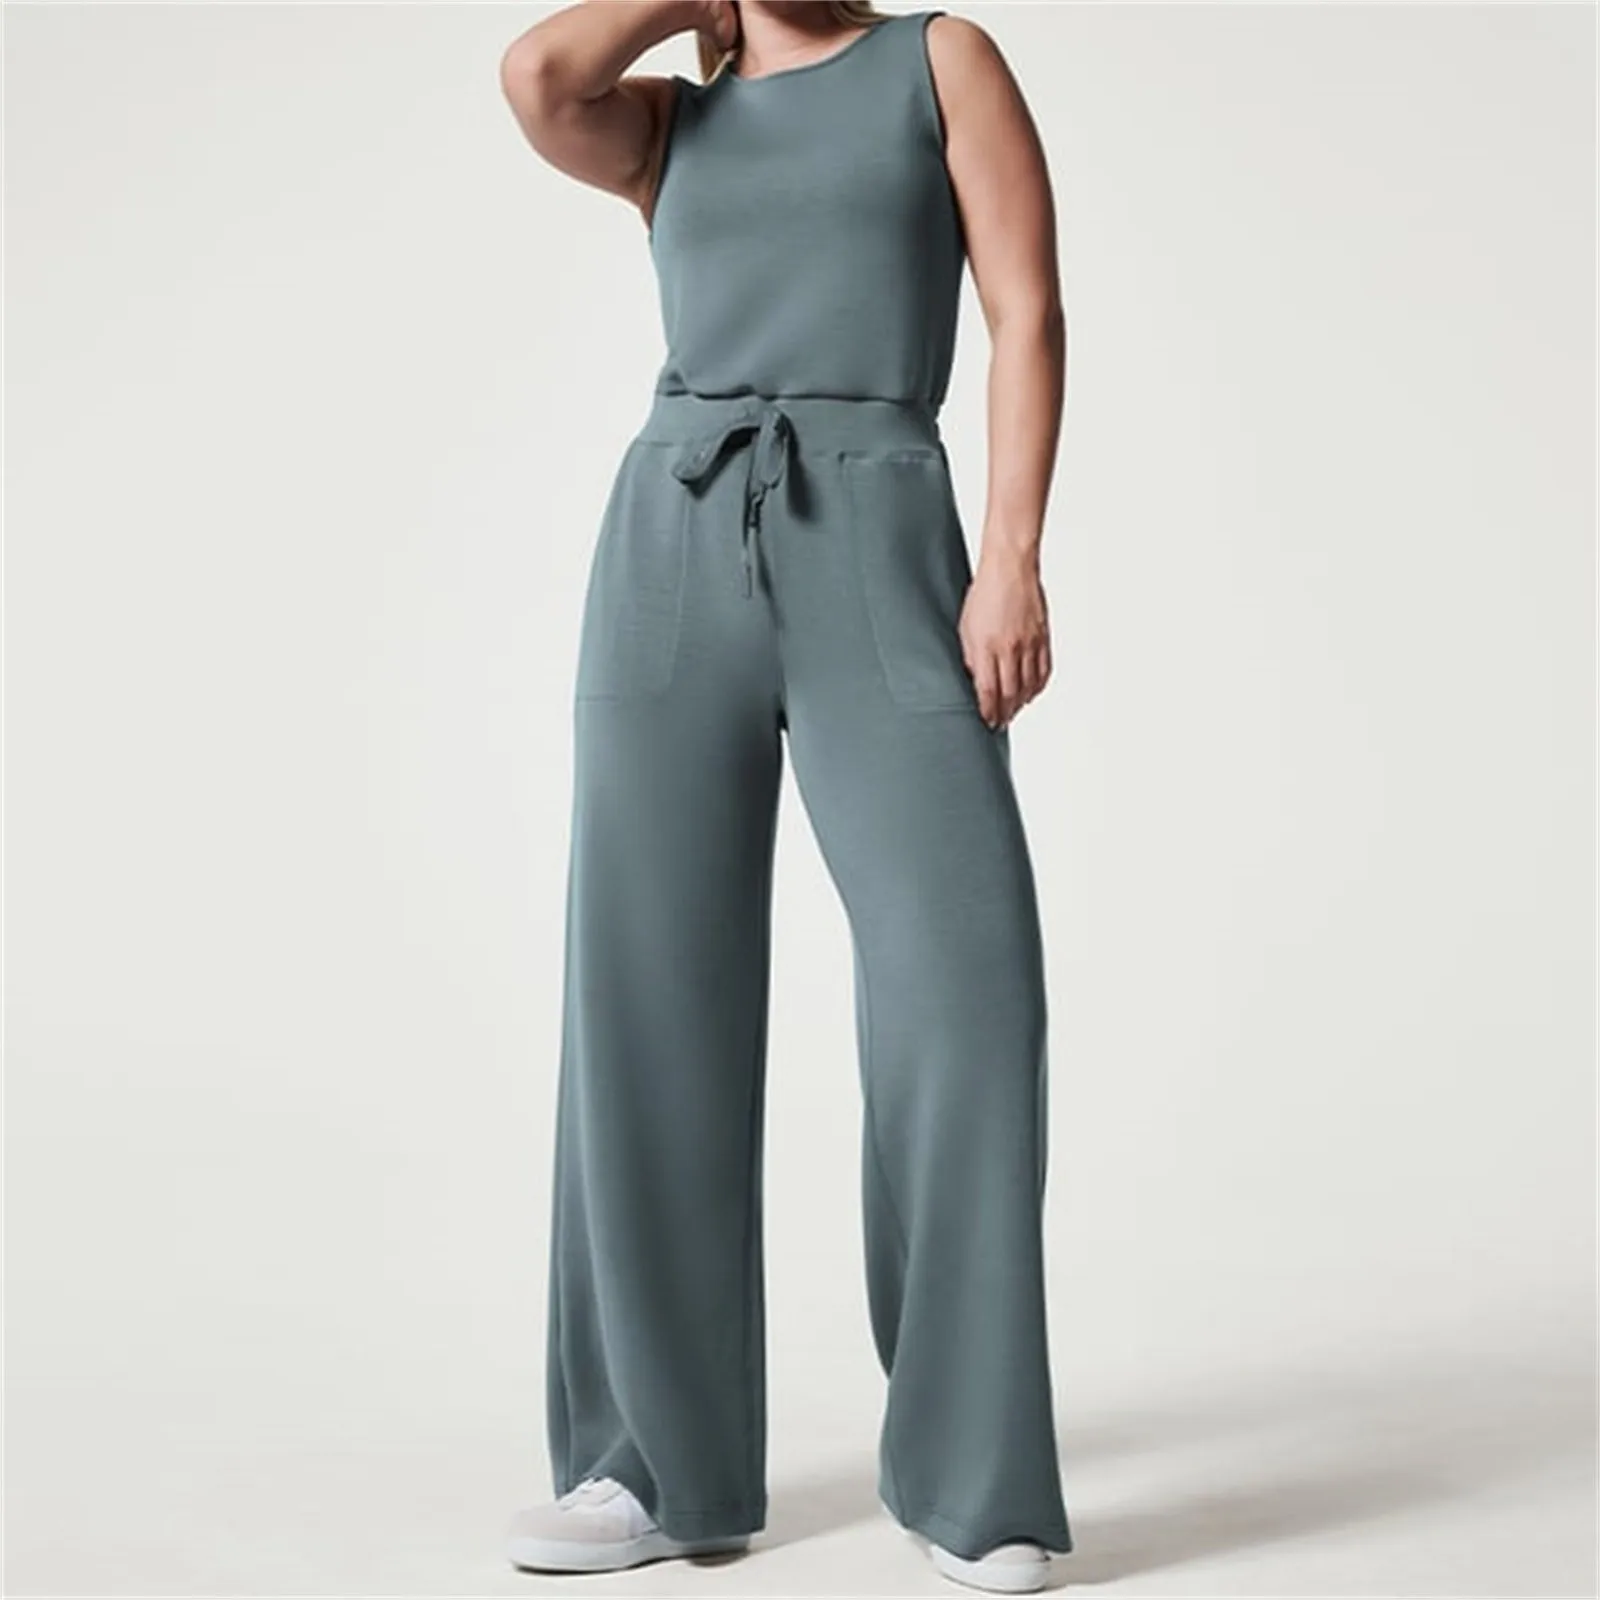 2023 New Jumpsuits for Women Casual Air Essentials Jumpsuit Ladies Summer Sleeveless Jumpsuit with Pockets Belted Wide Leg Pant long sleeved summer drawstring pockets waisted single breasted cardigan ladies sets new fashion female suit women loose jumpsuit